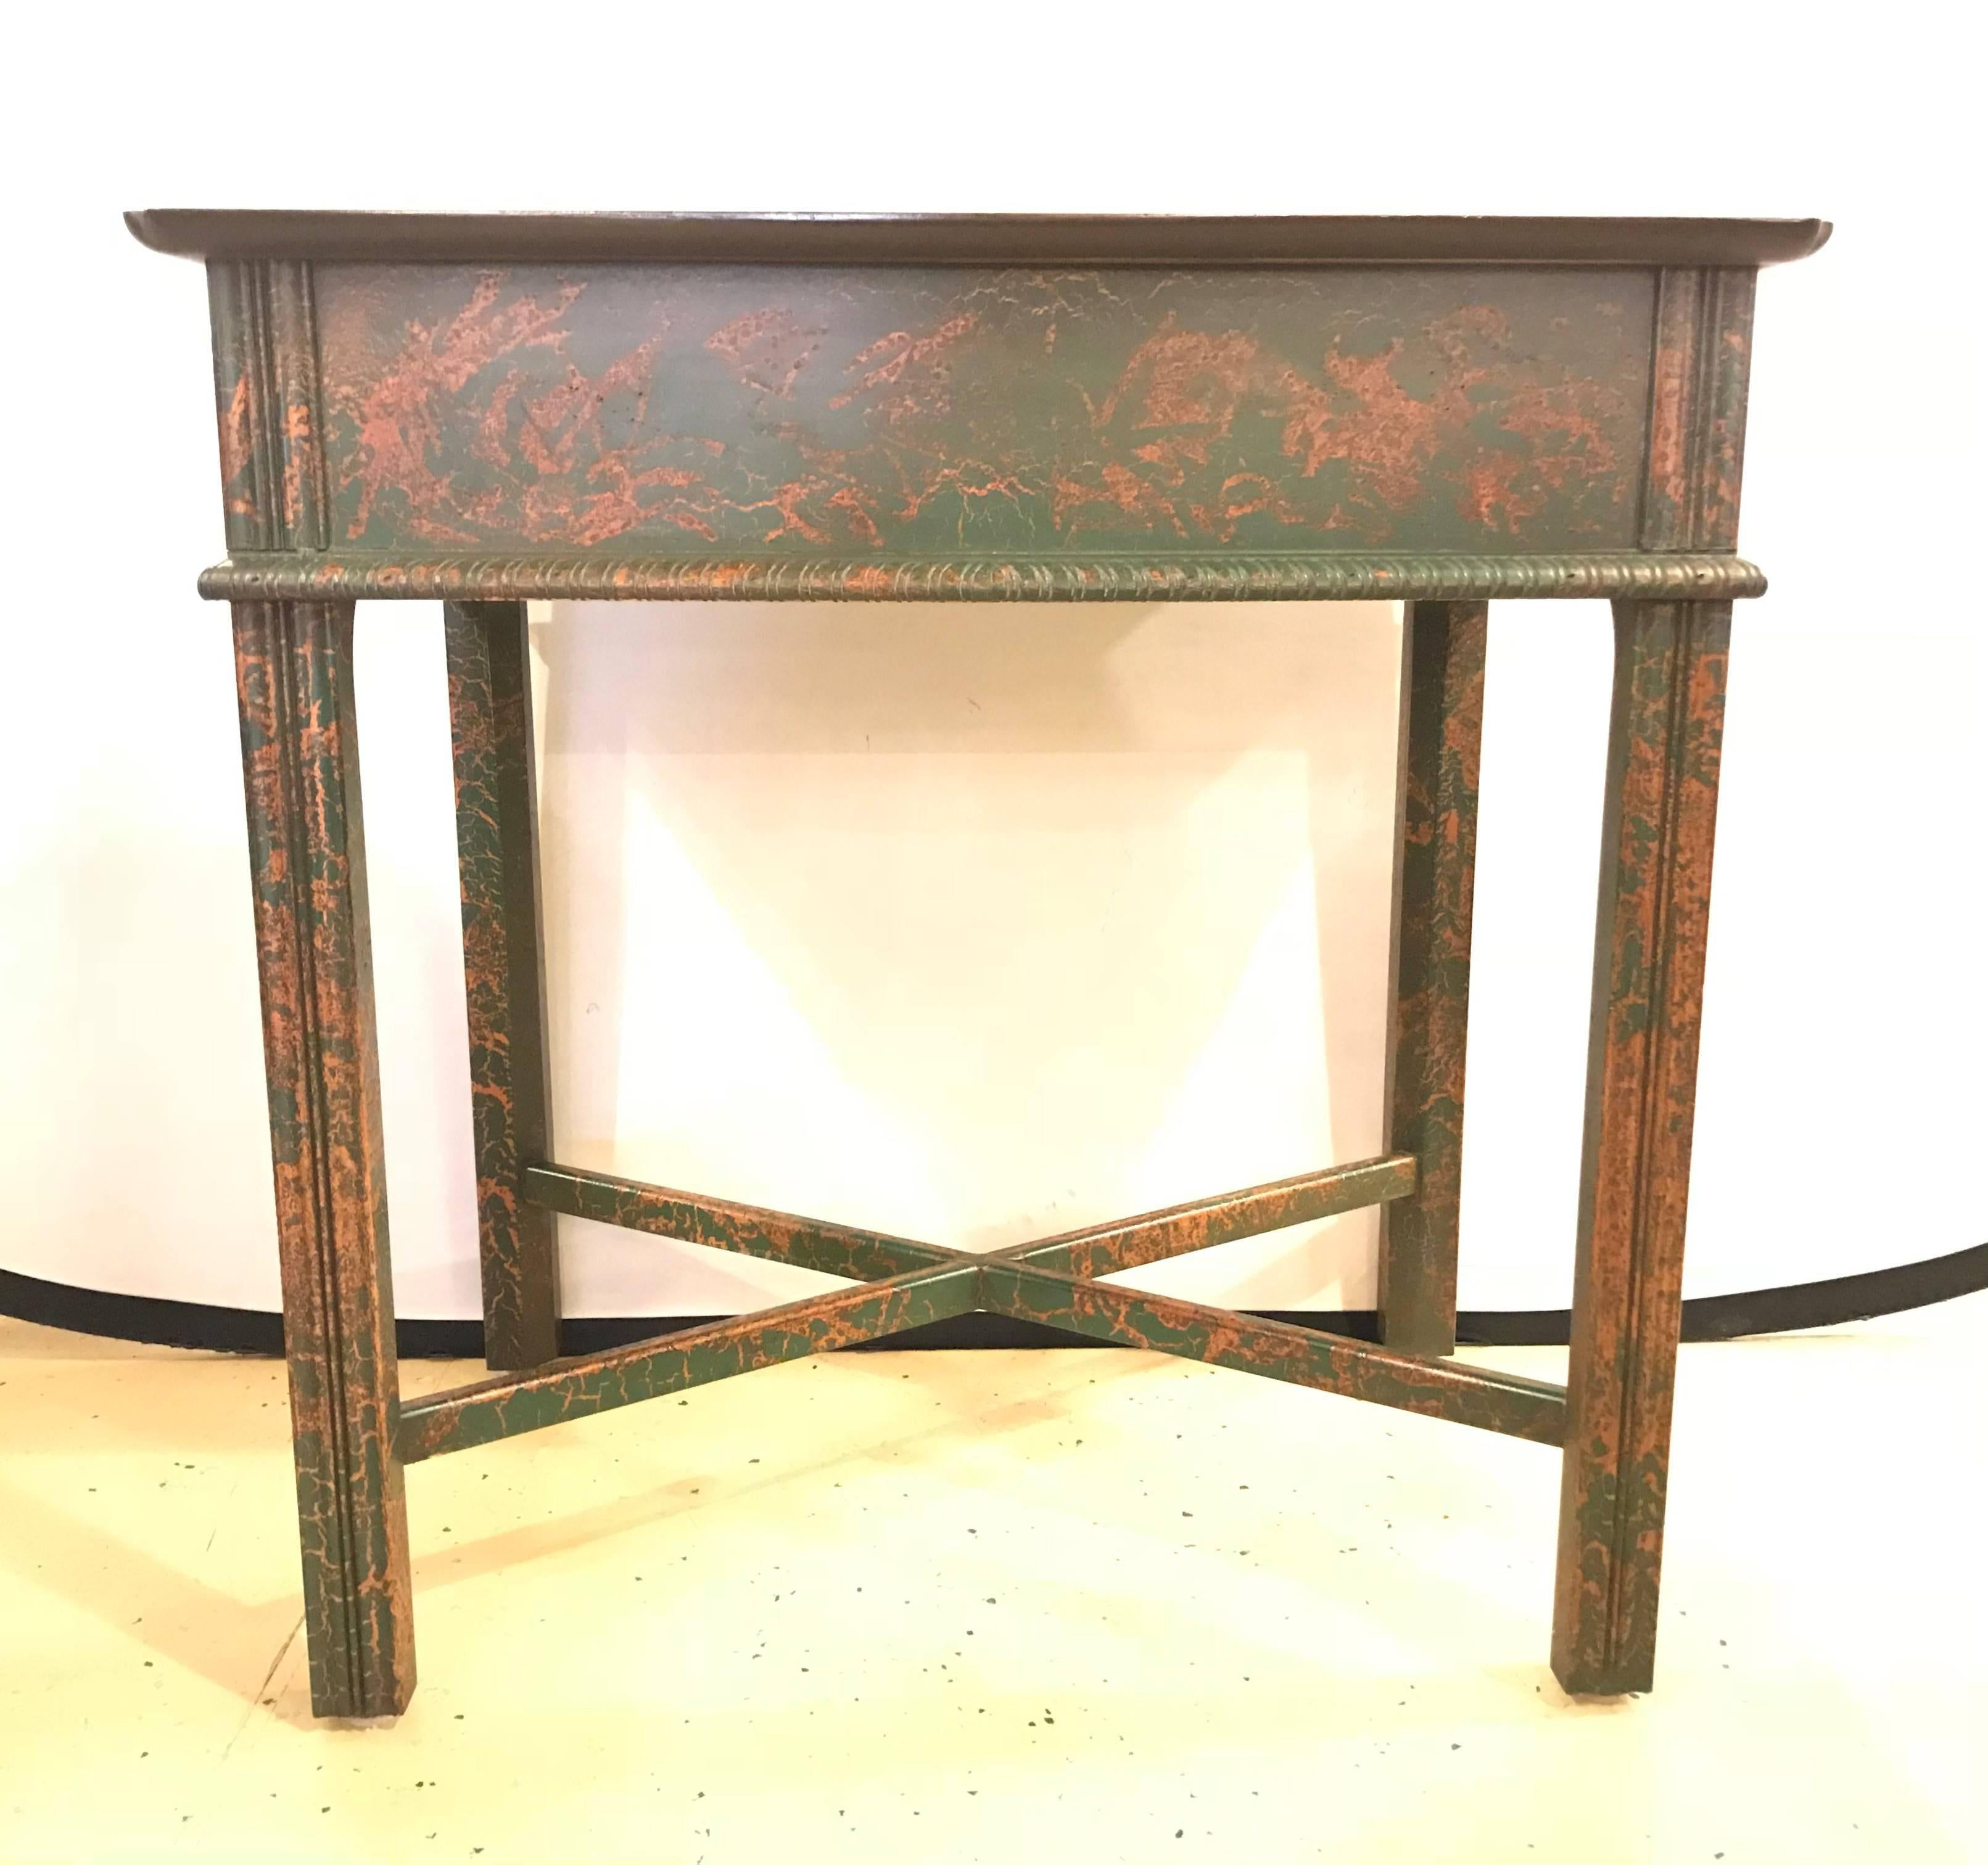 A chinoiserie decorated end table with one oak secondary drawer by South Hampton furniture company.